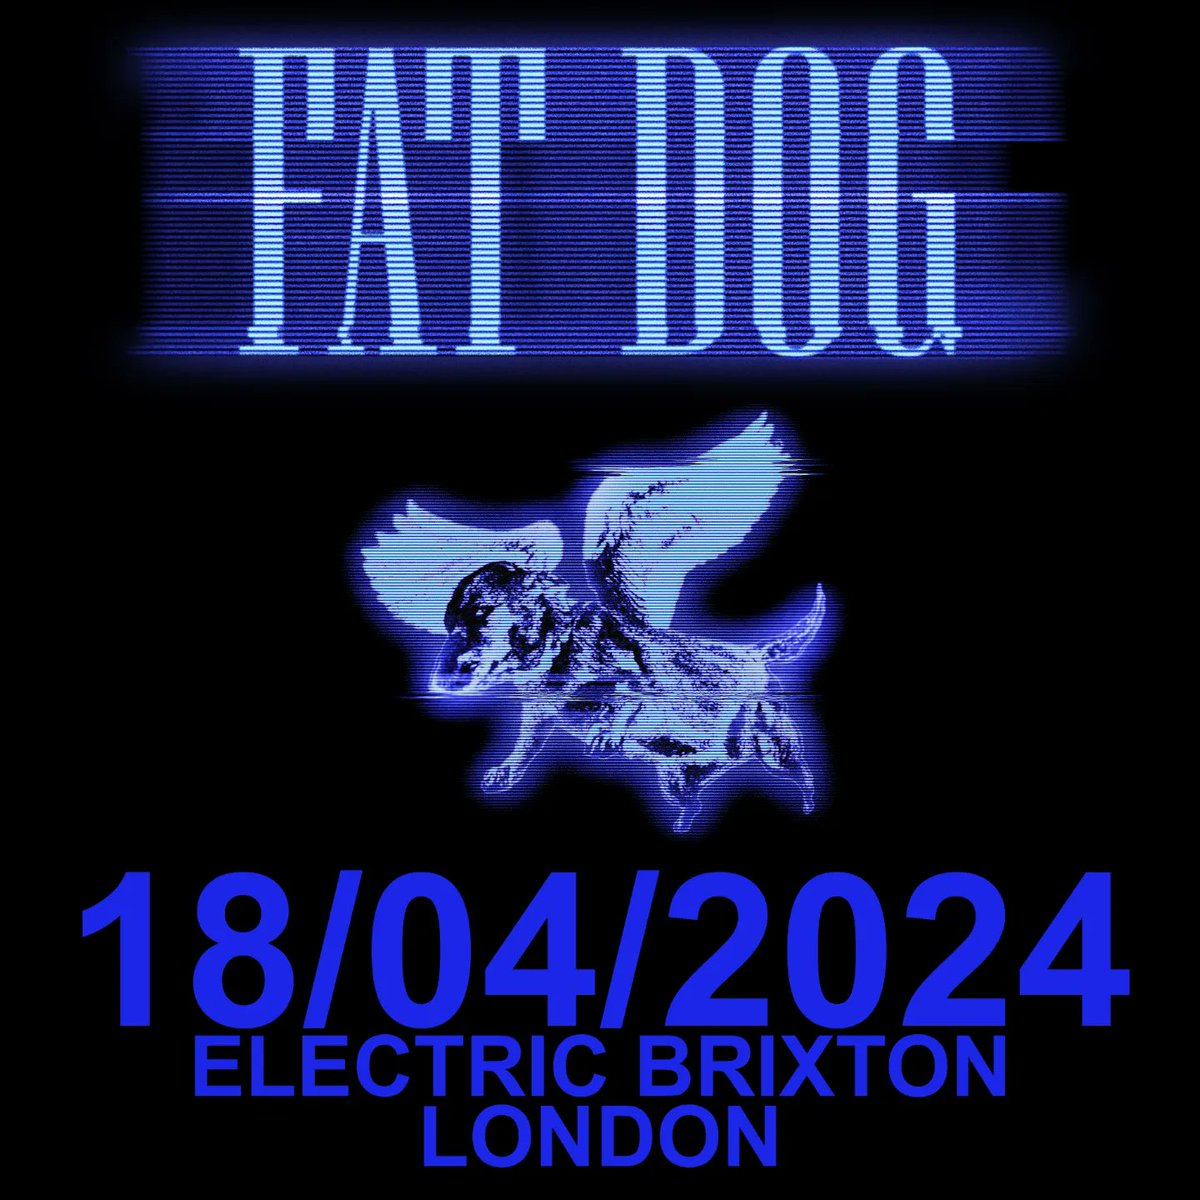 WOOF WOOF! ARE DOGS ELECTRIC? TICKETS ON SALE THIS FRIDAY! @electricbrixton SIGN UP - Fatdogfatdogfatdog.com